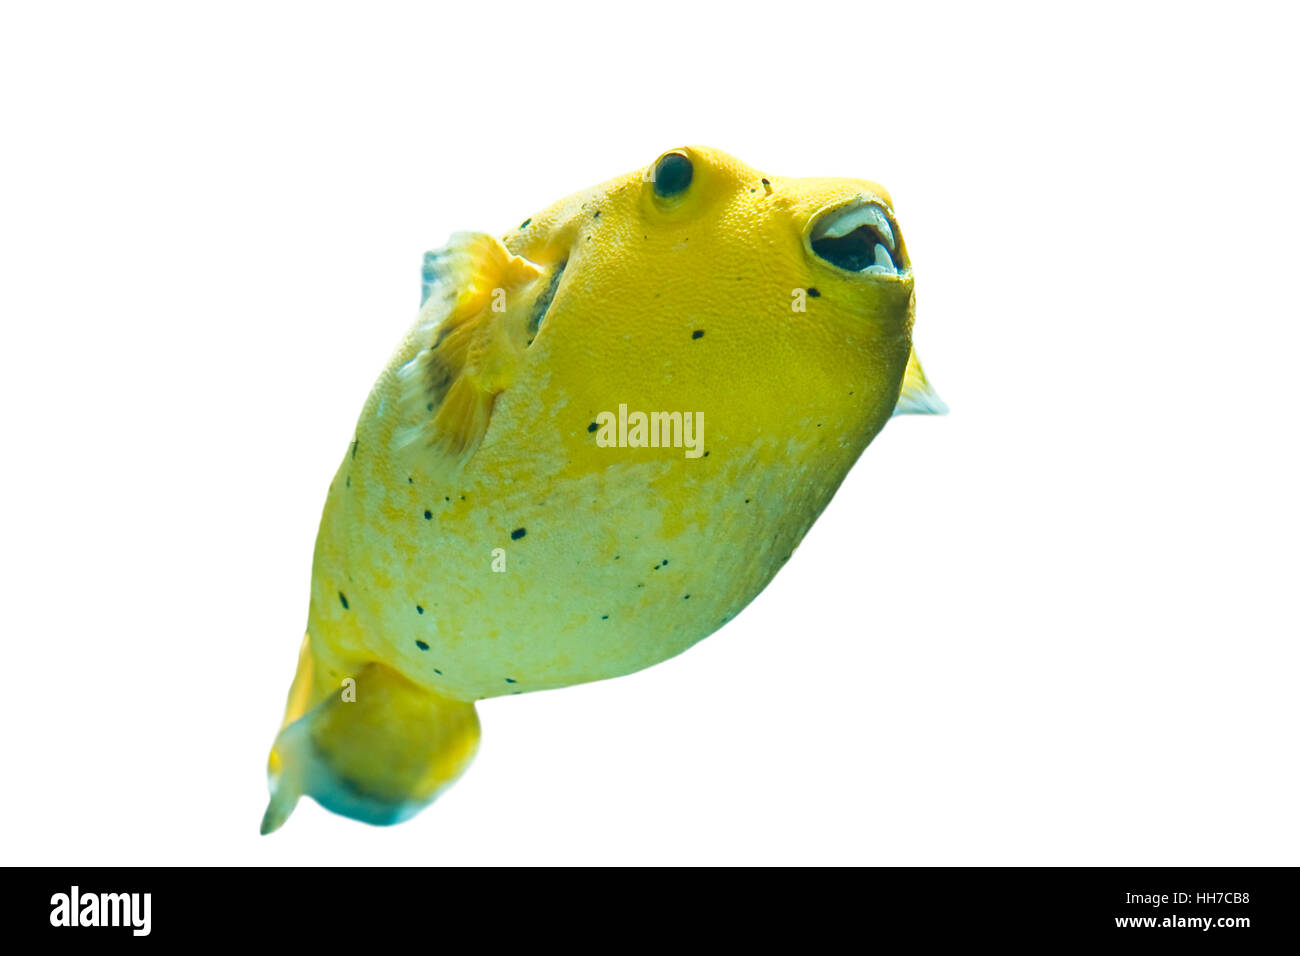 Golden Pufferfish ,Arothron citrinellus, in a white background Stock Photo